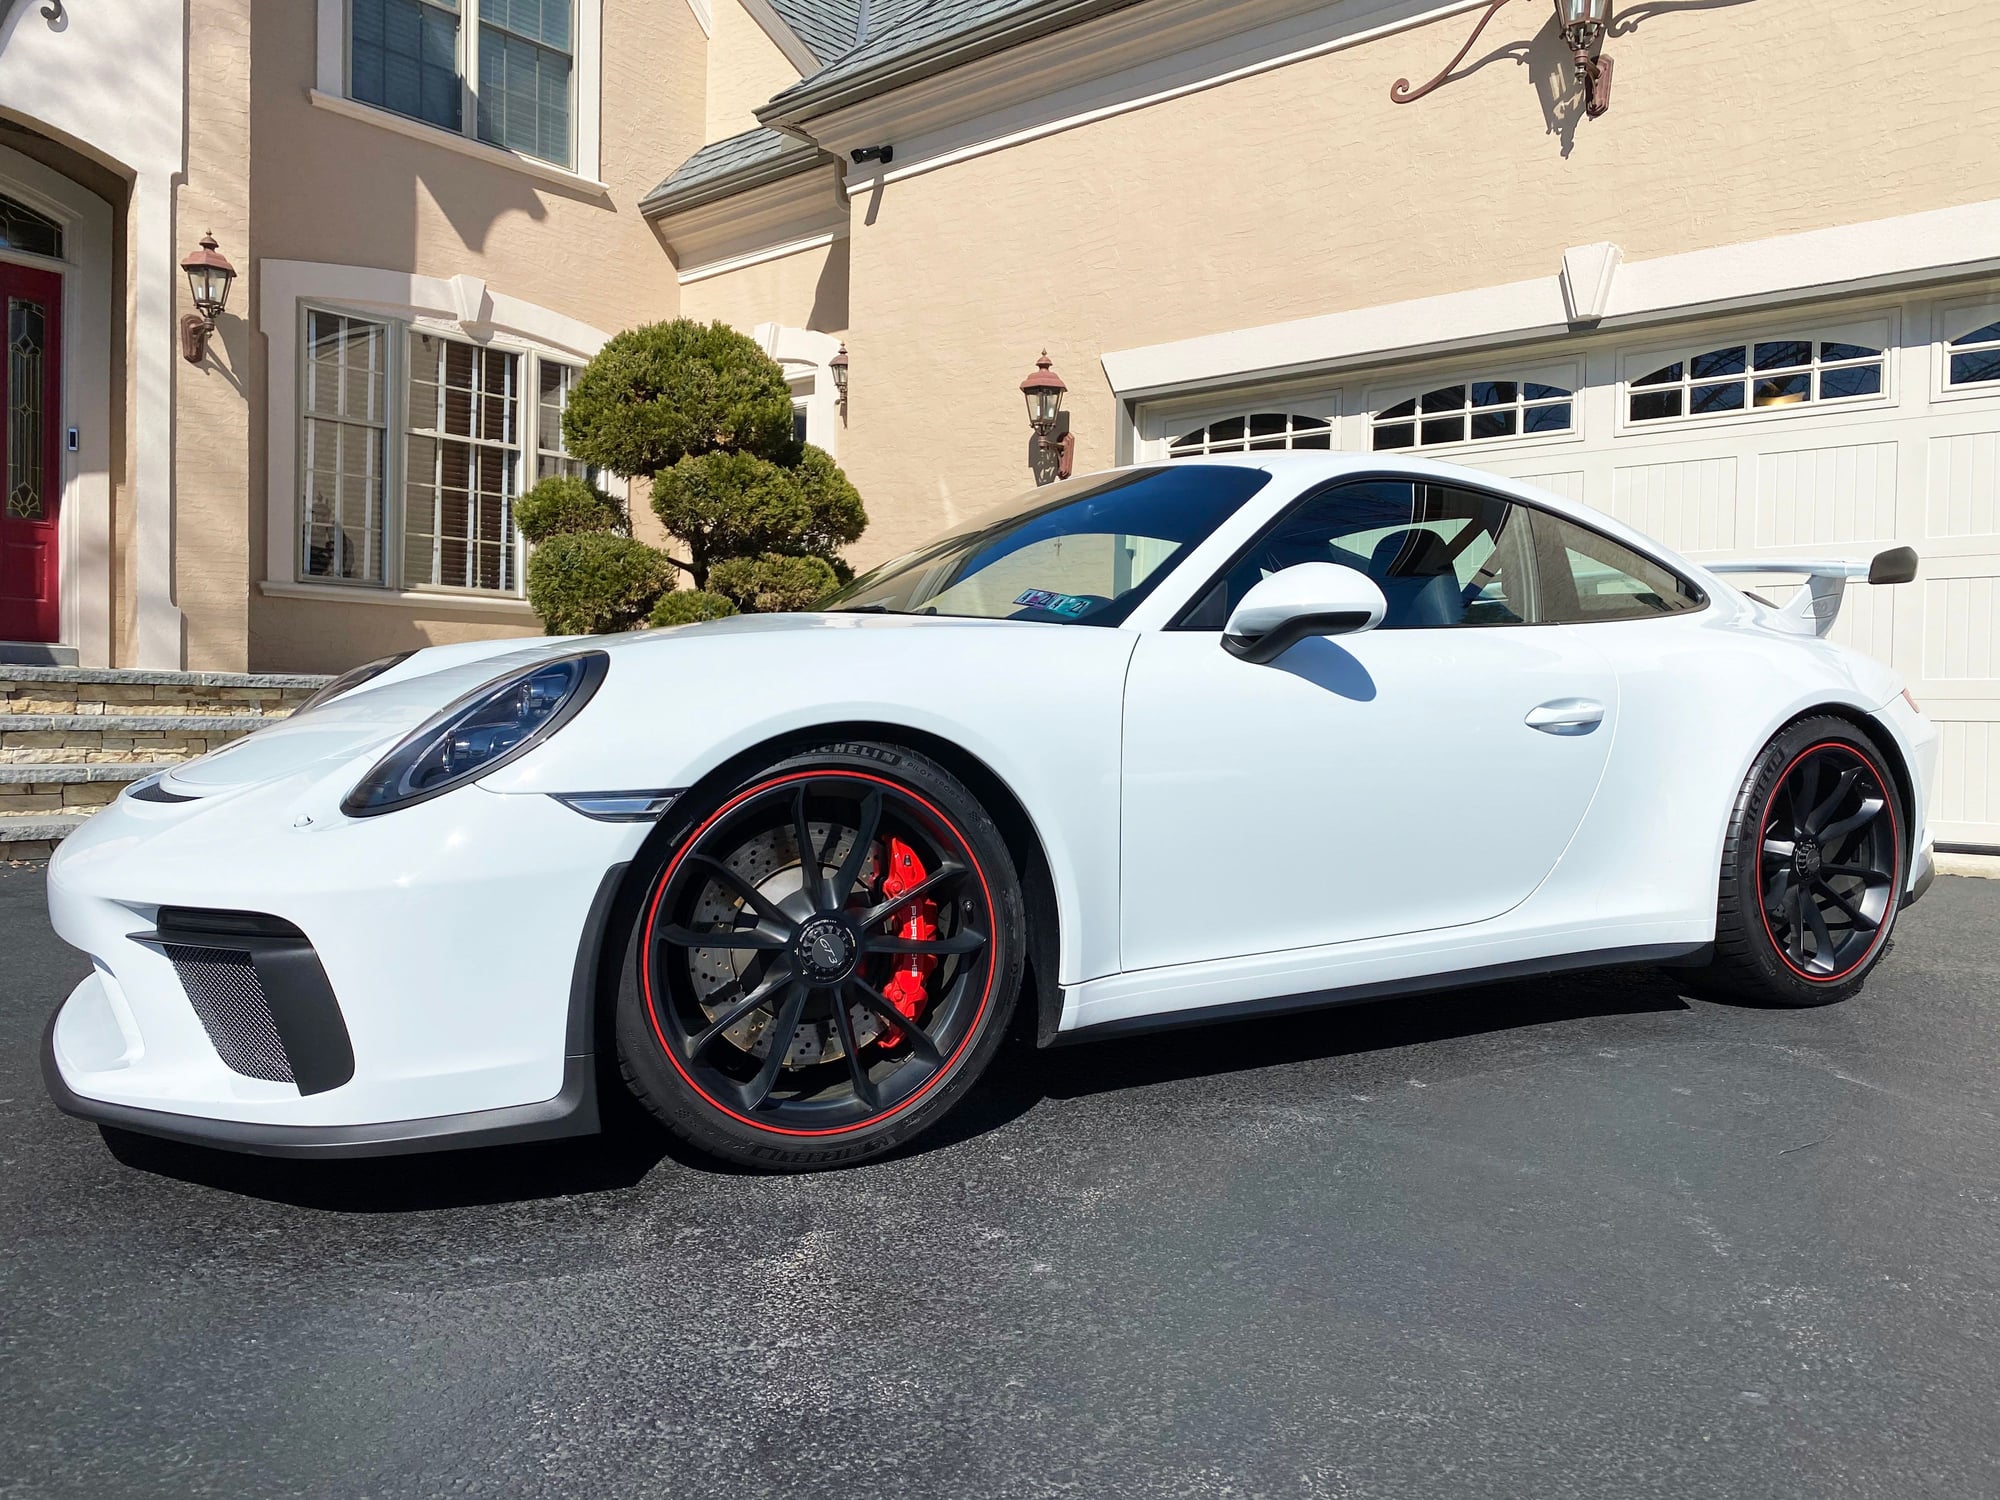 2018 Porsche GT3 - 2018 PORSCHE GT3 - MANUAL - WHITE - 18 WAY SEATS - Used - VIN WP0AC2A93JS177085 - 4,853 Miles - 6 cyl - 2WD - Manual - Coupe - White - Reading, PA 19606, United States